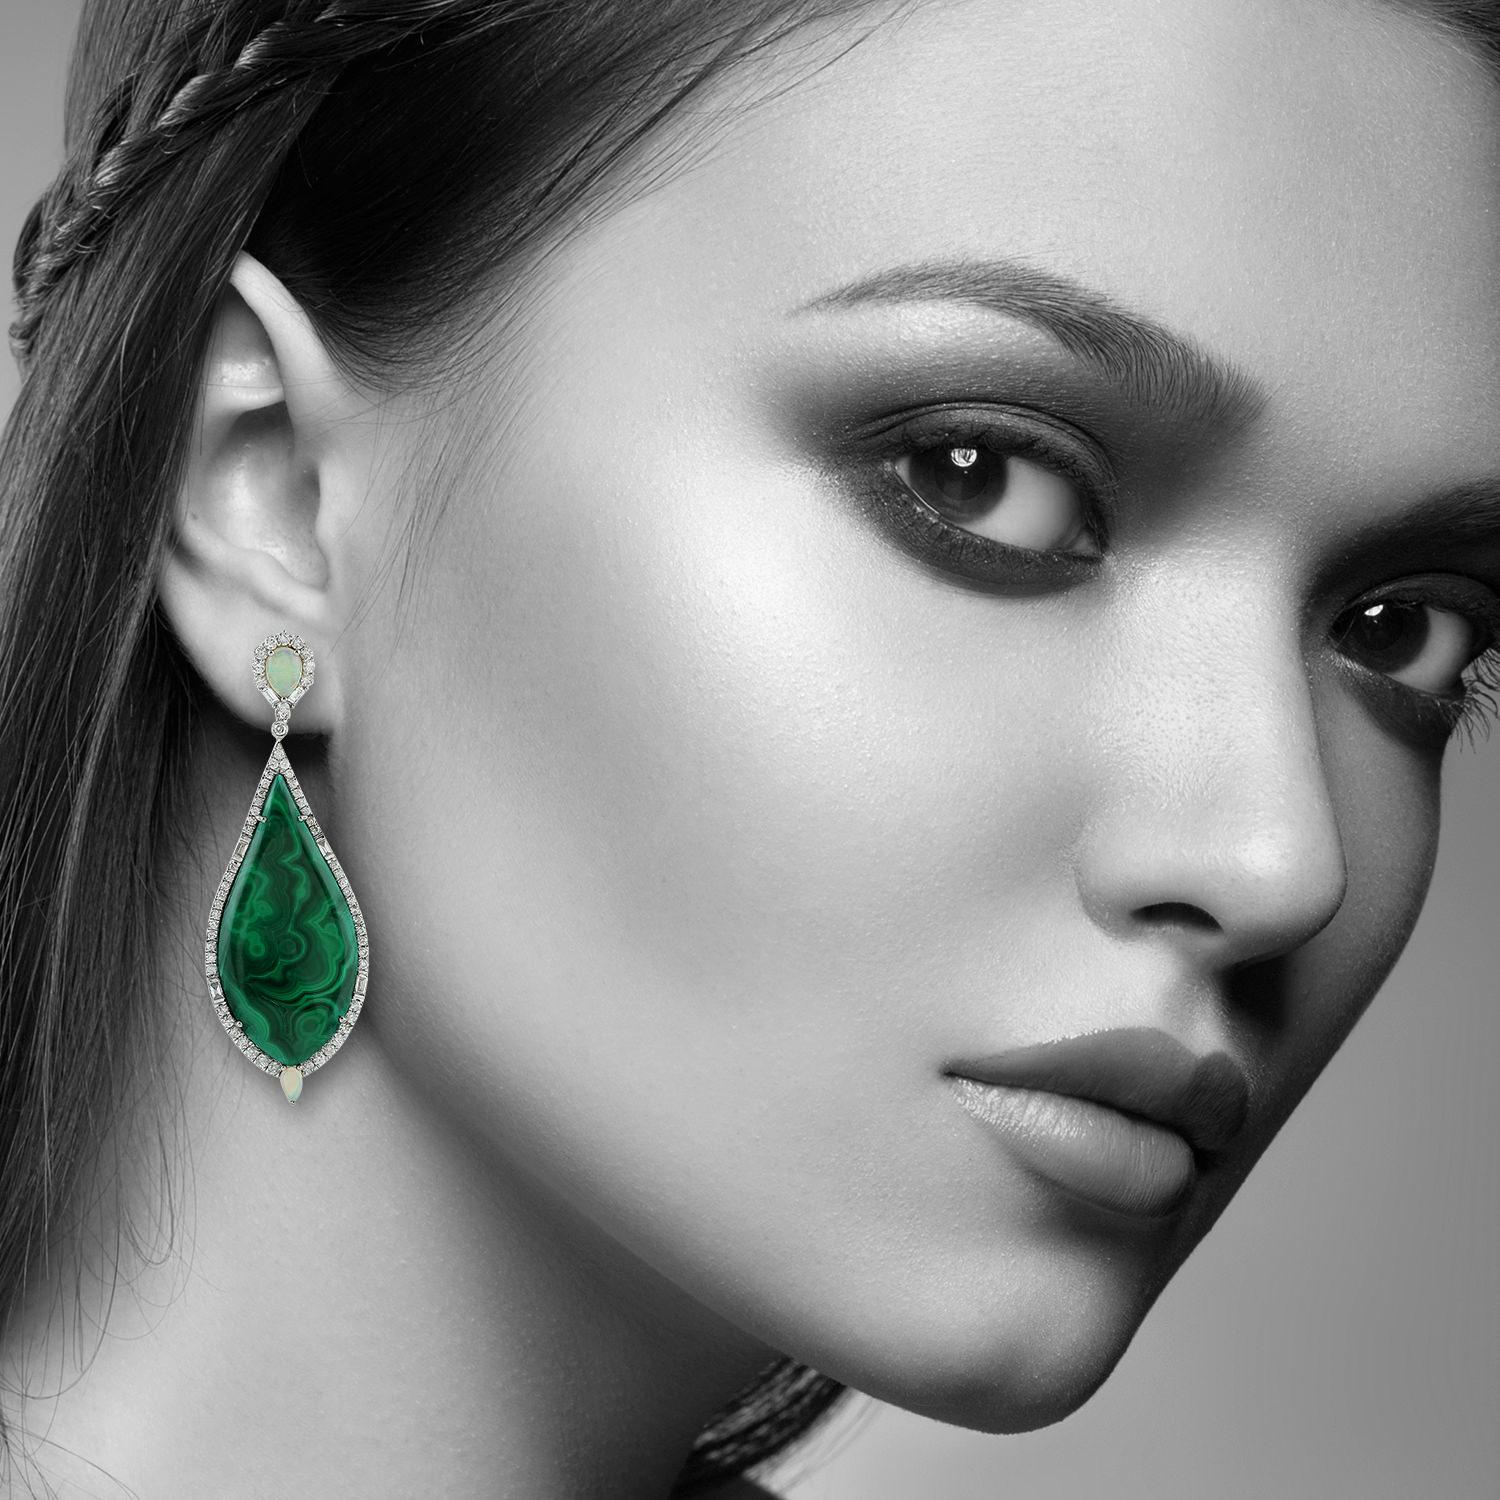 Handcrafted from 18-karat gold, these stunning earrings are set with 41.2 carats malachite, 1.0 carat opal and 2.27 carats of sparkling diamonds.

FOLLOW  MEGHNA JEWELS storefront to view the latest collection & exclusive pieces.  Meghna Jewels is